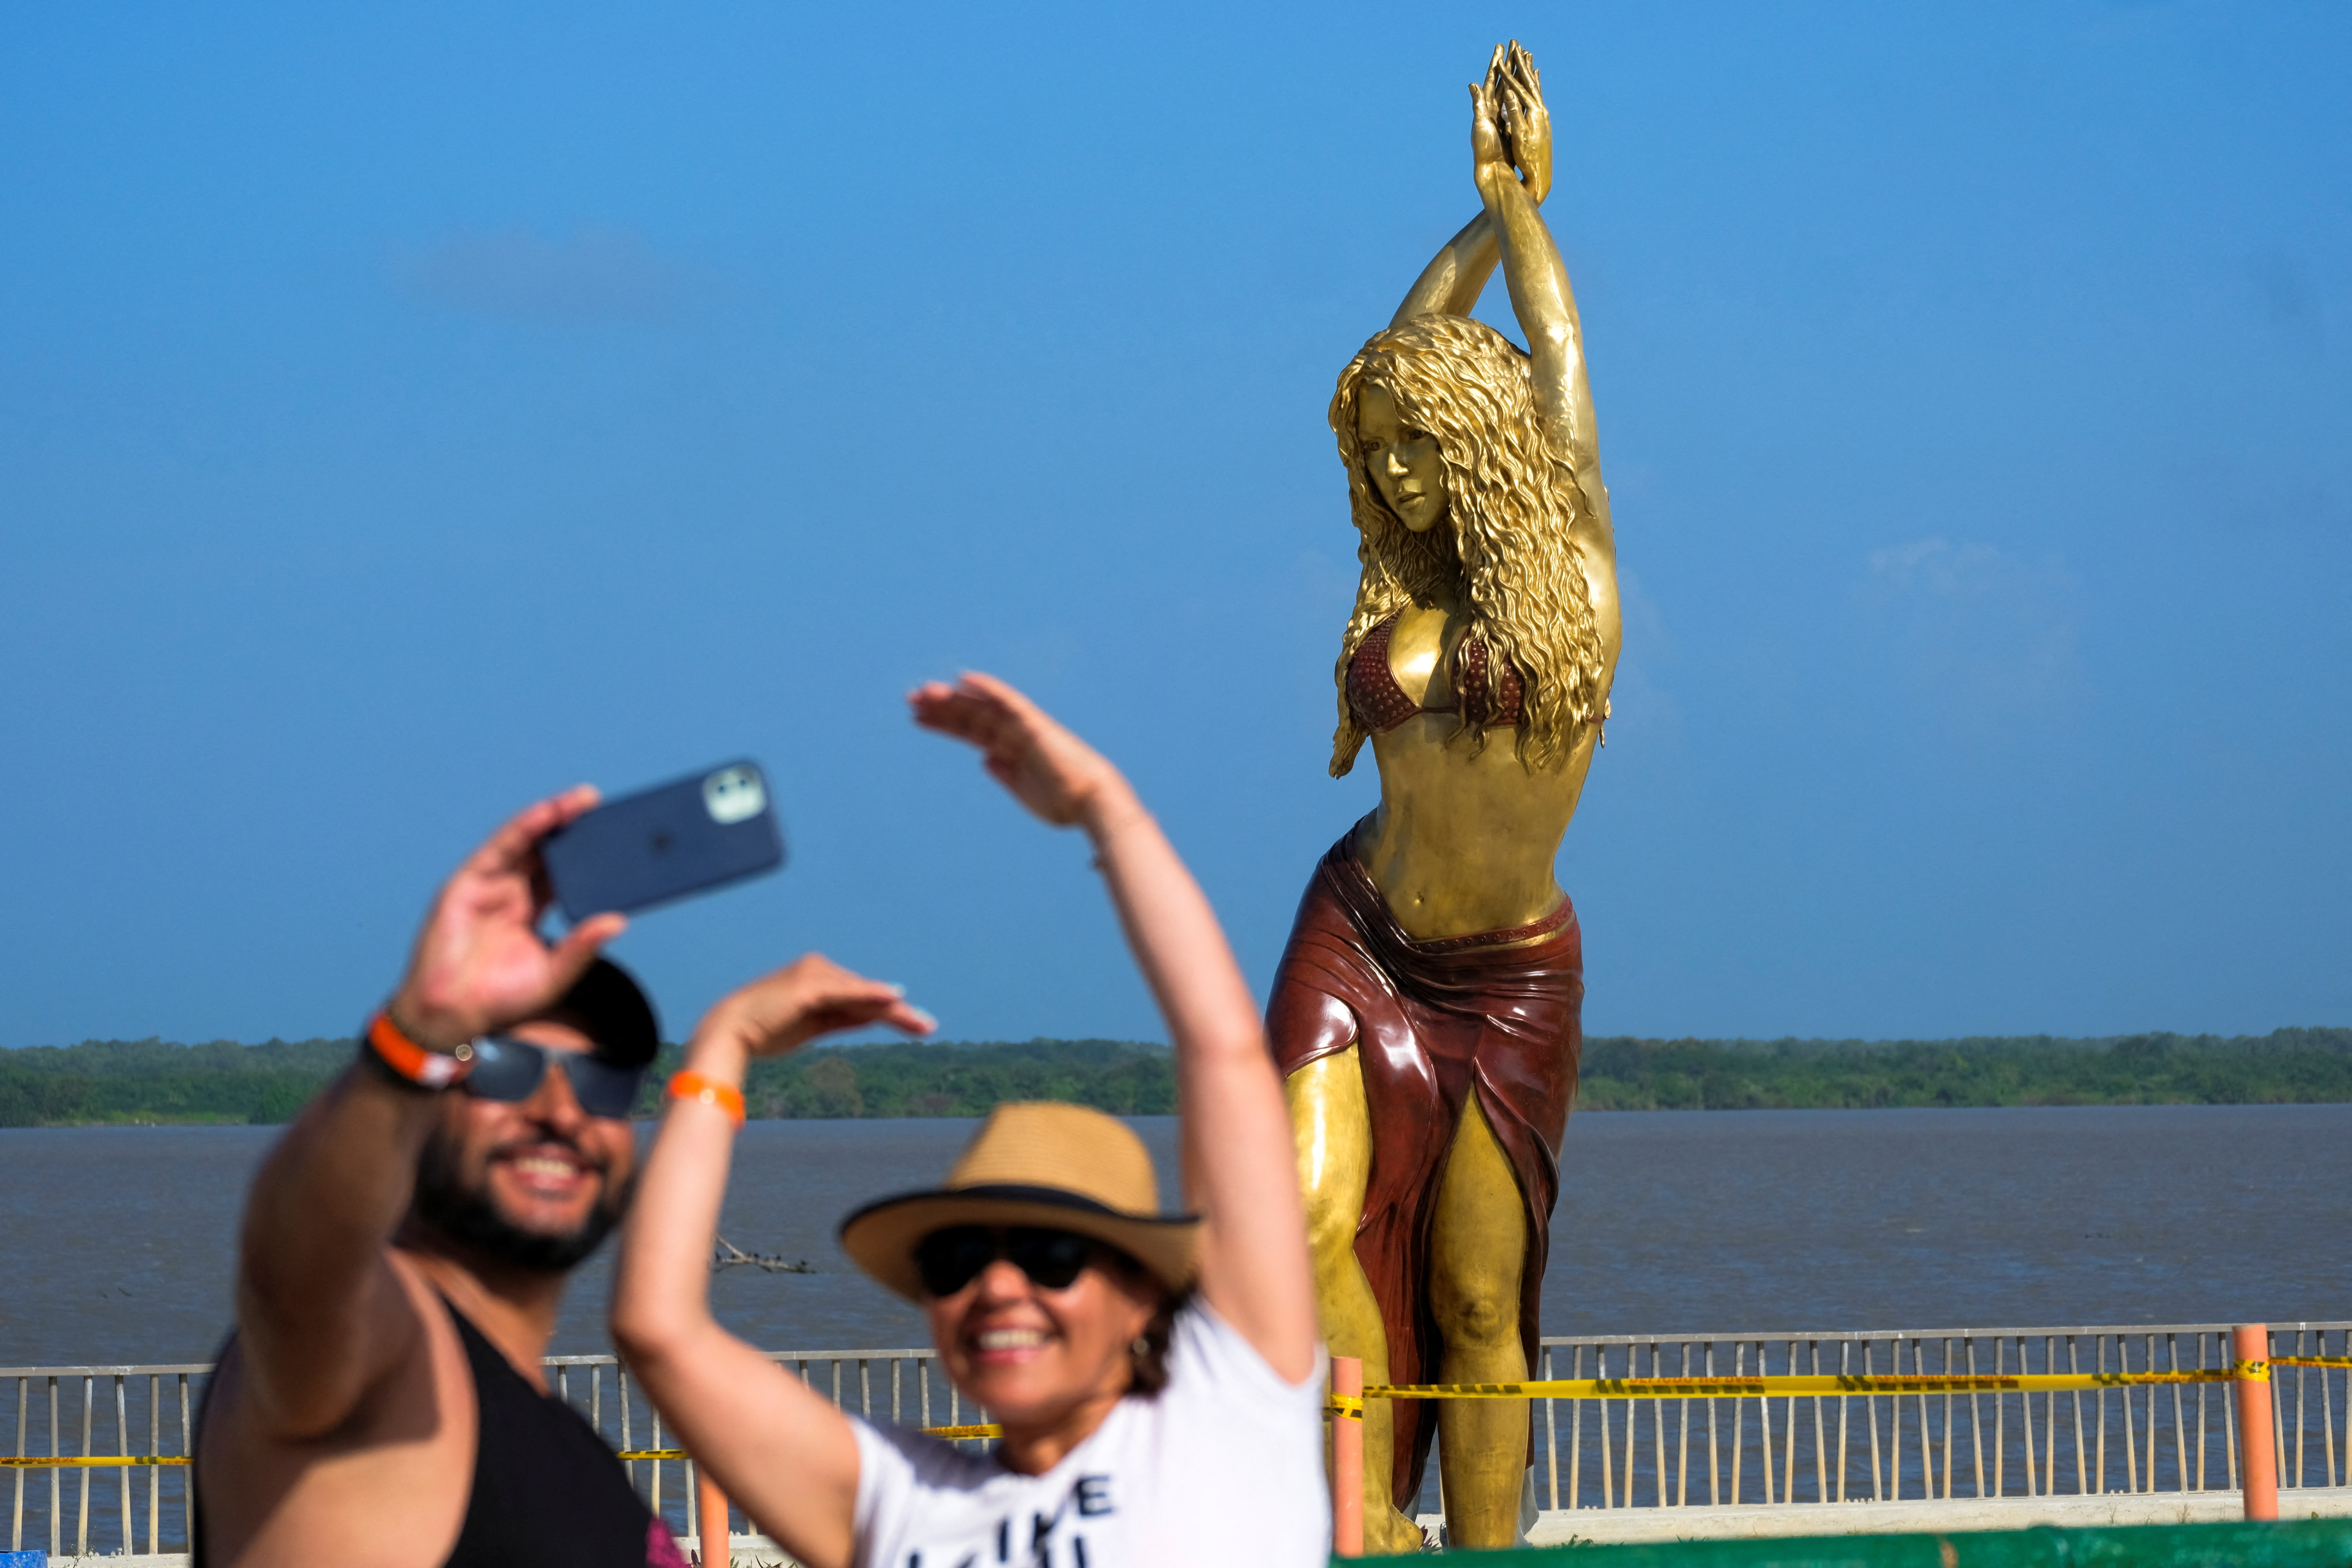 Shakira's Legacy: A Bronze Ode to Music and Philanthropy in Barranquilla